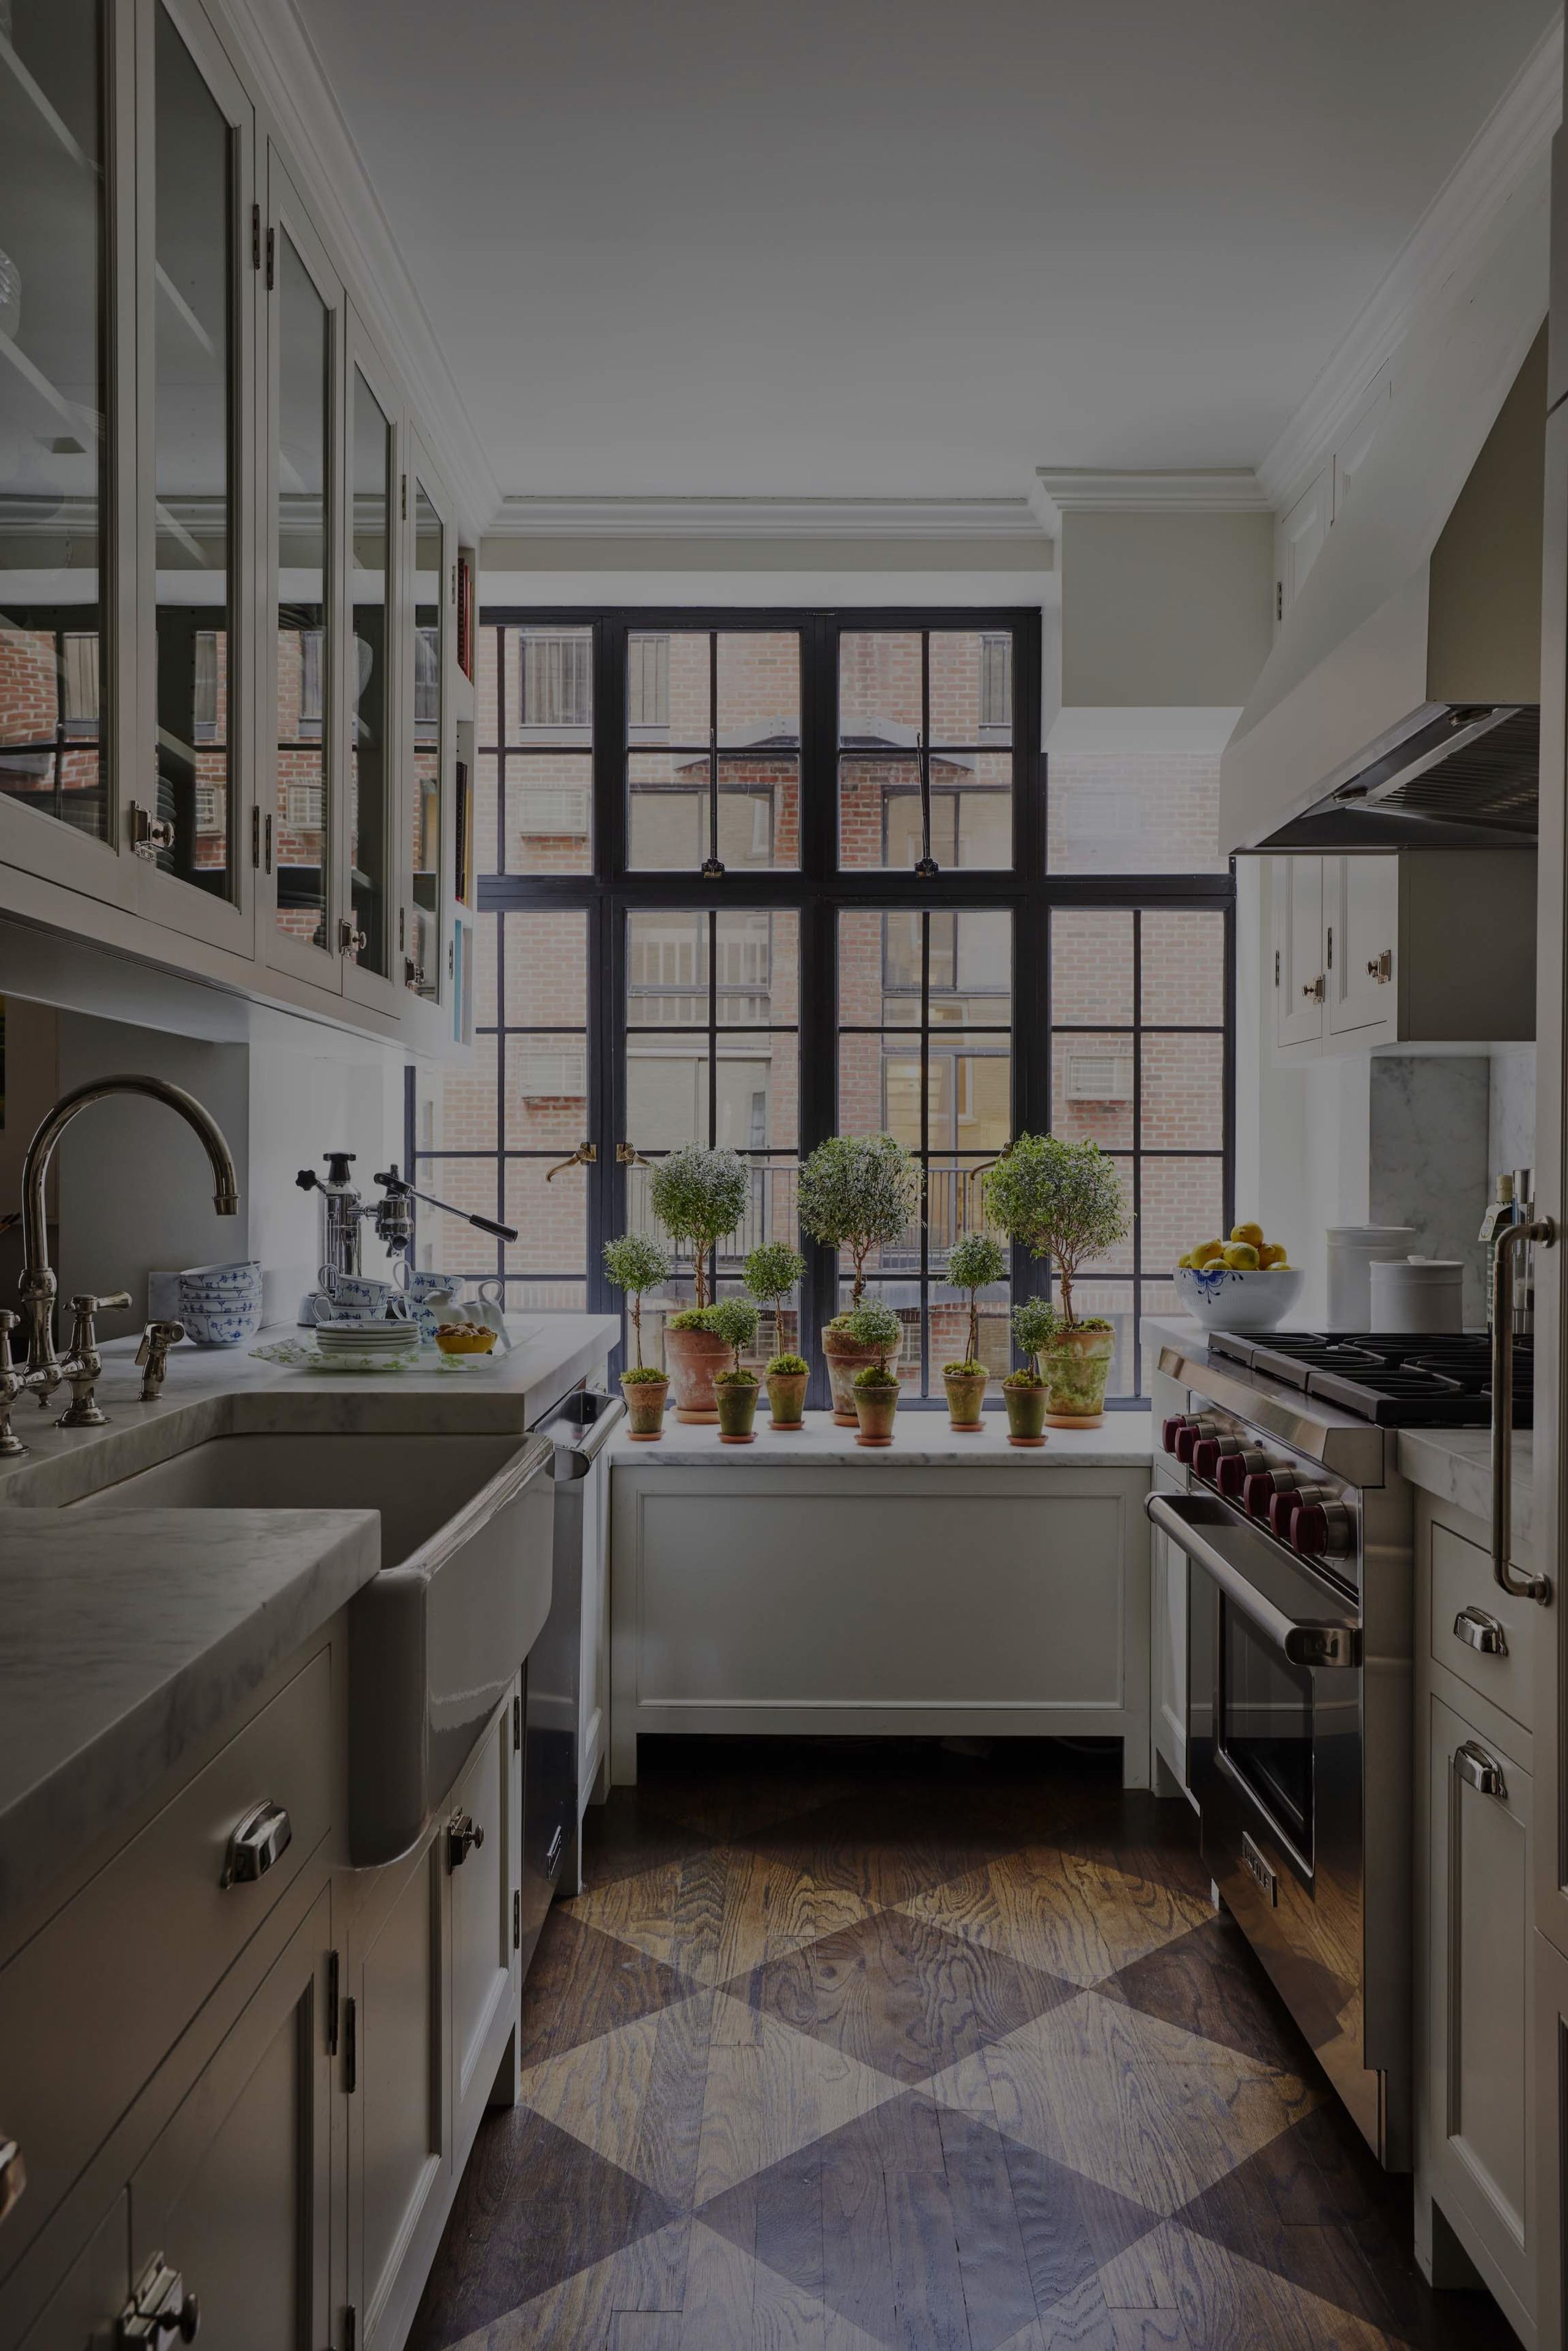 How to Maximize Space in a Small Kitchen